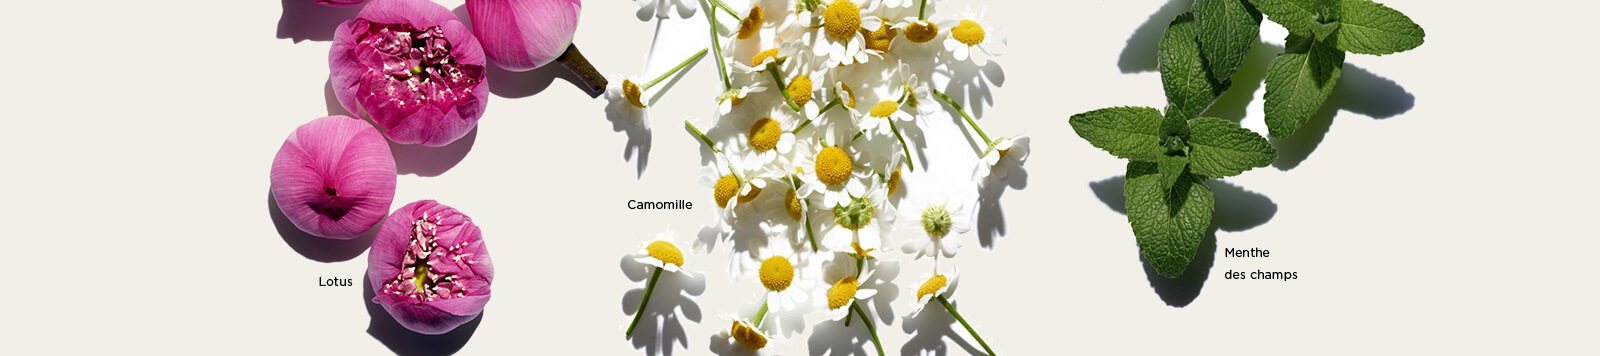 Images of Lotus, Camomile, and Field Mint ingredients